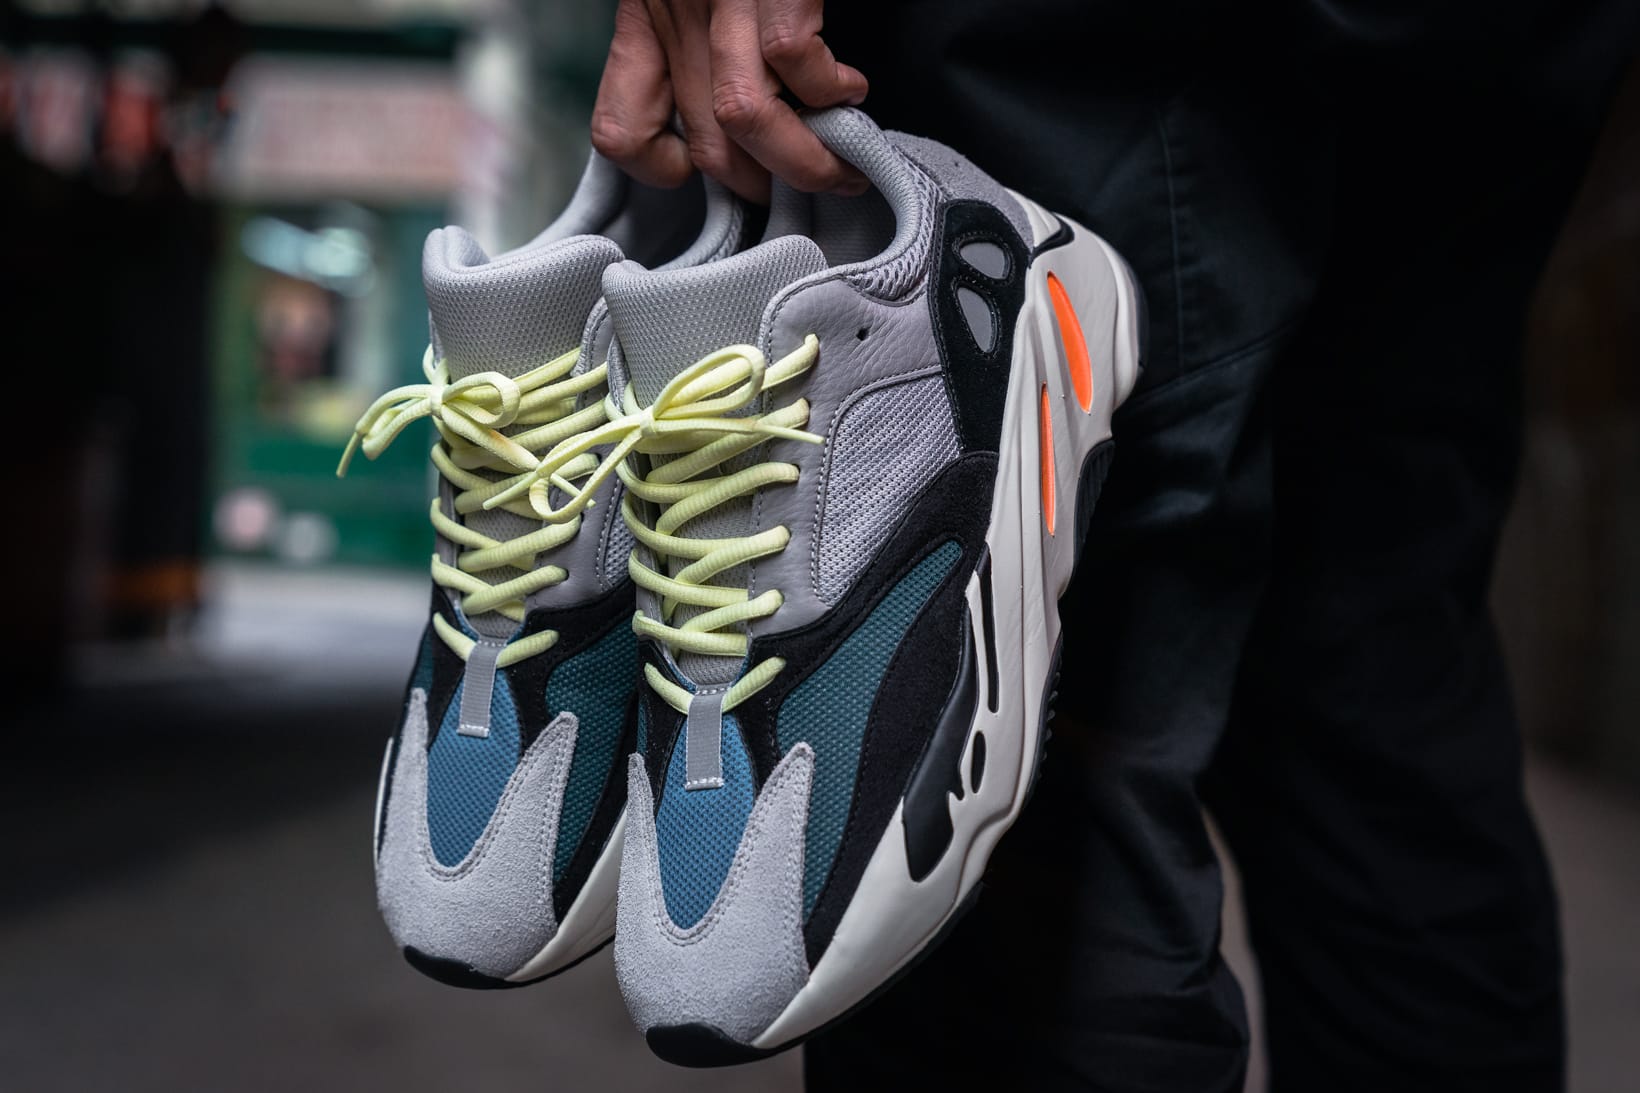 yeezy 700 wave runner laces